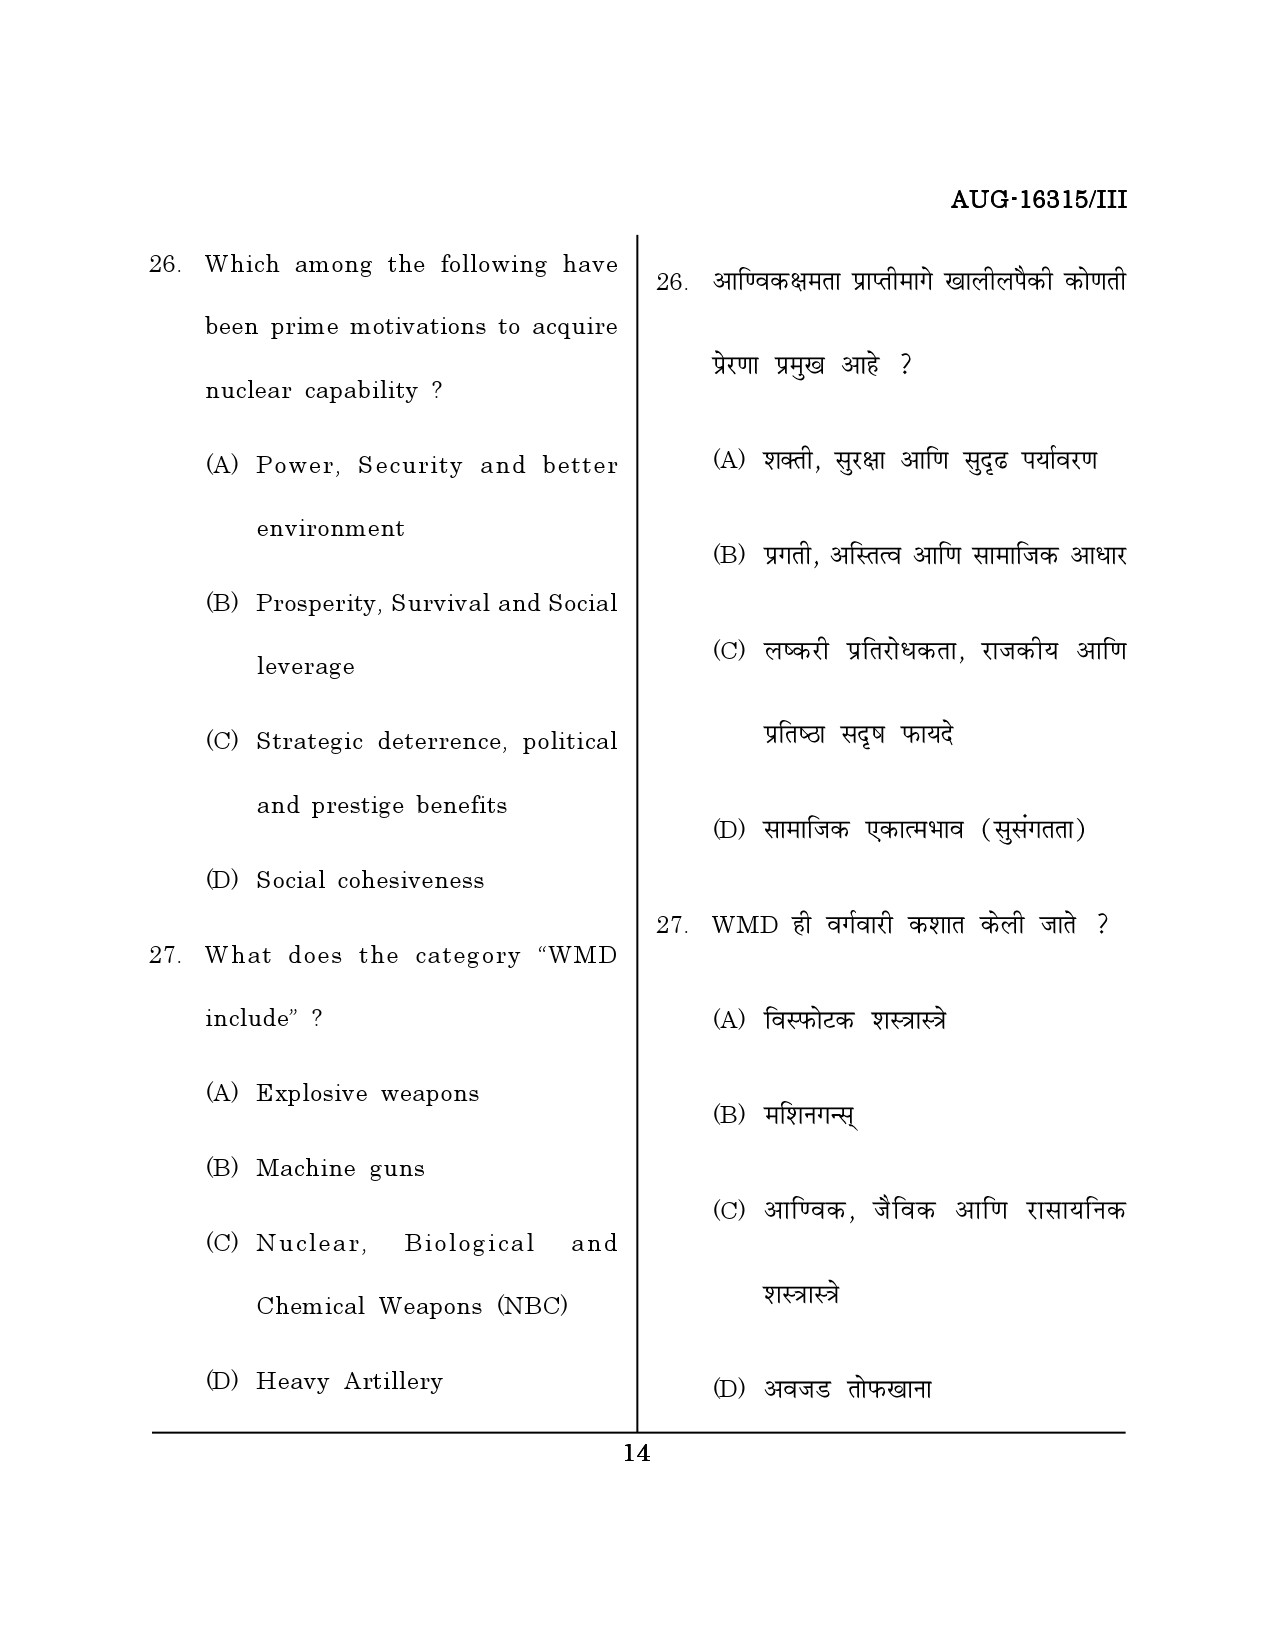 Maharashtra SET Defence and Strategic Studies Question Paper III August 2015 13